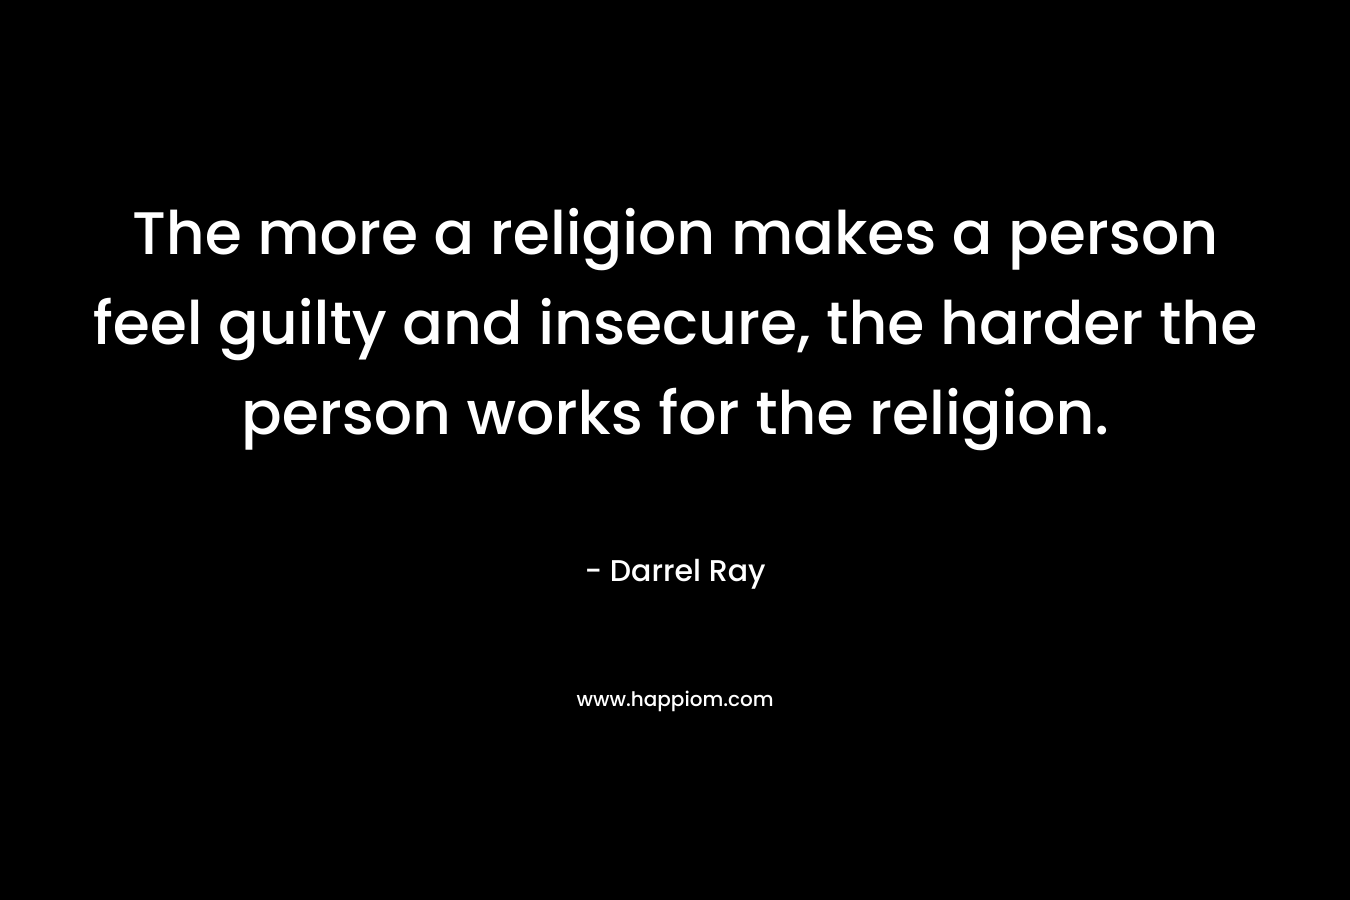 The more a religion makes a person feel guilty and insecure, the harder the person works for the religion. – Darrel Ray